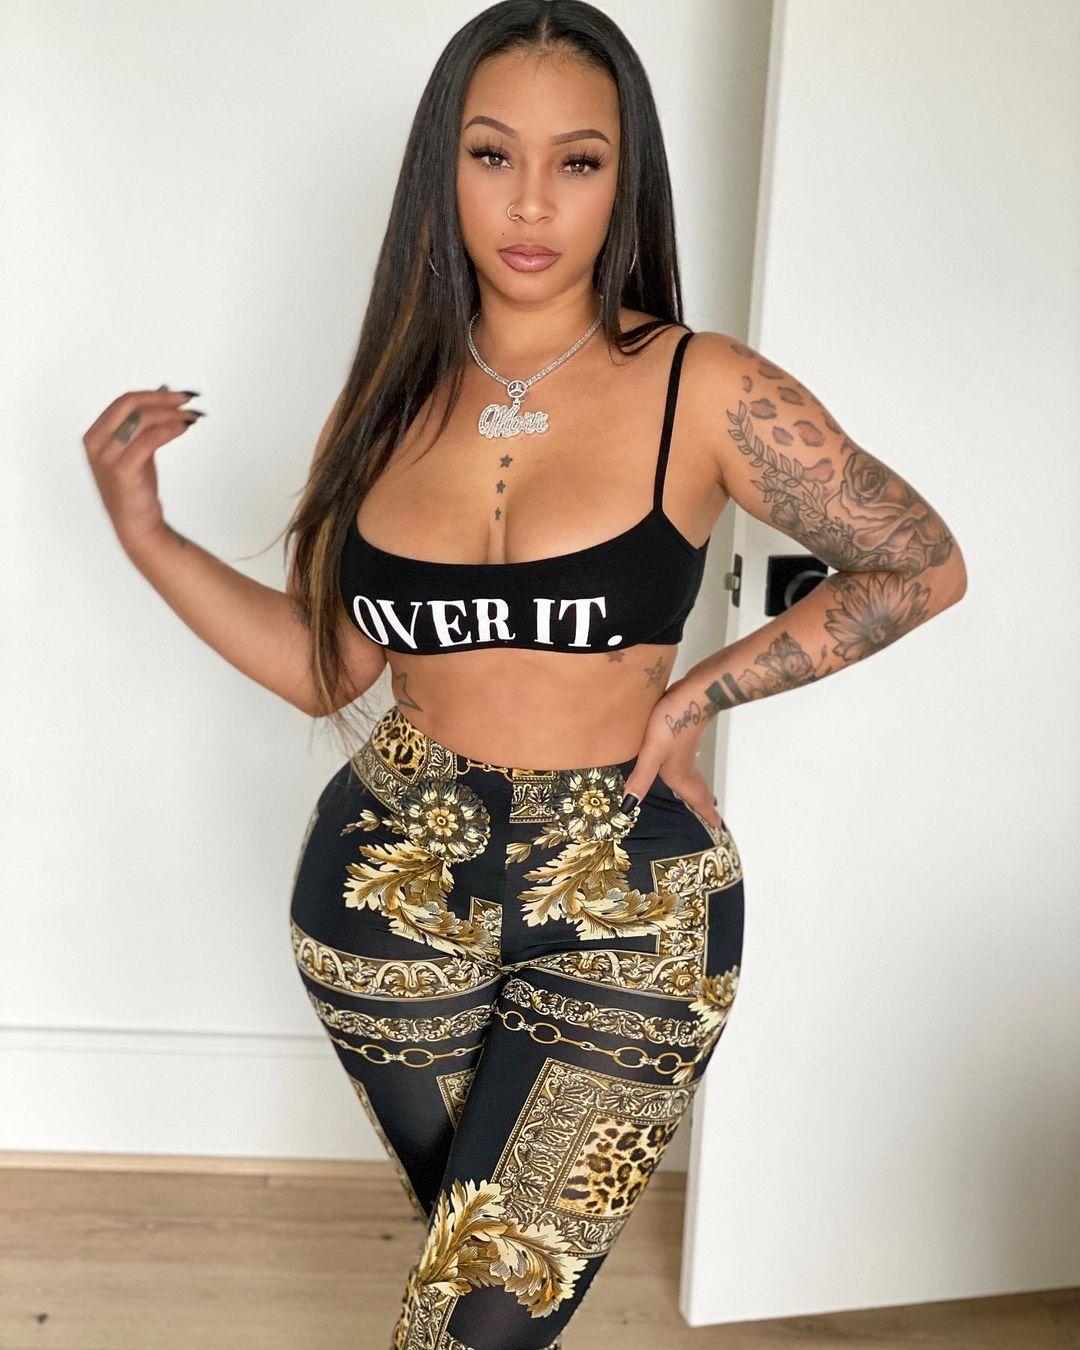 A photo showing Instagram model, Mercedes Morr in a two-piece outfit 